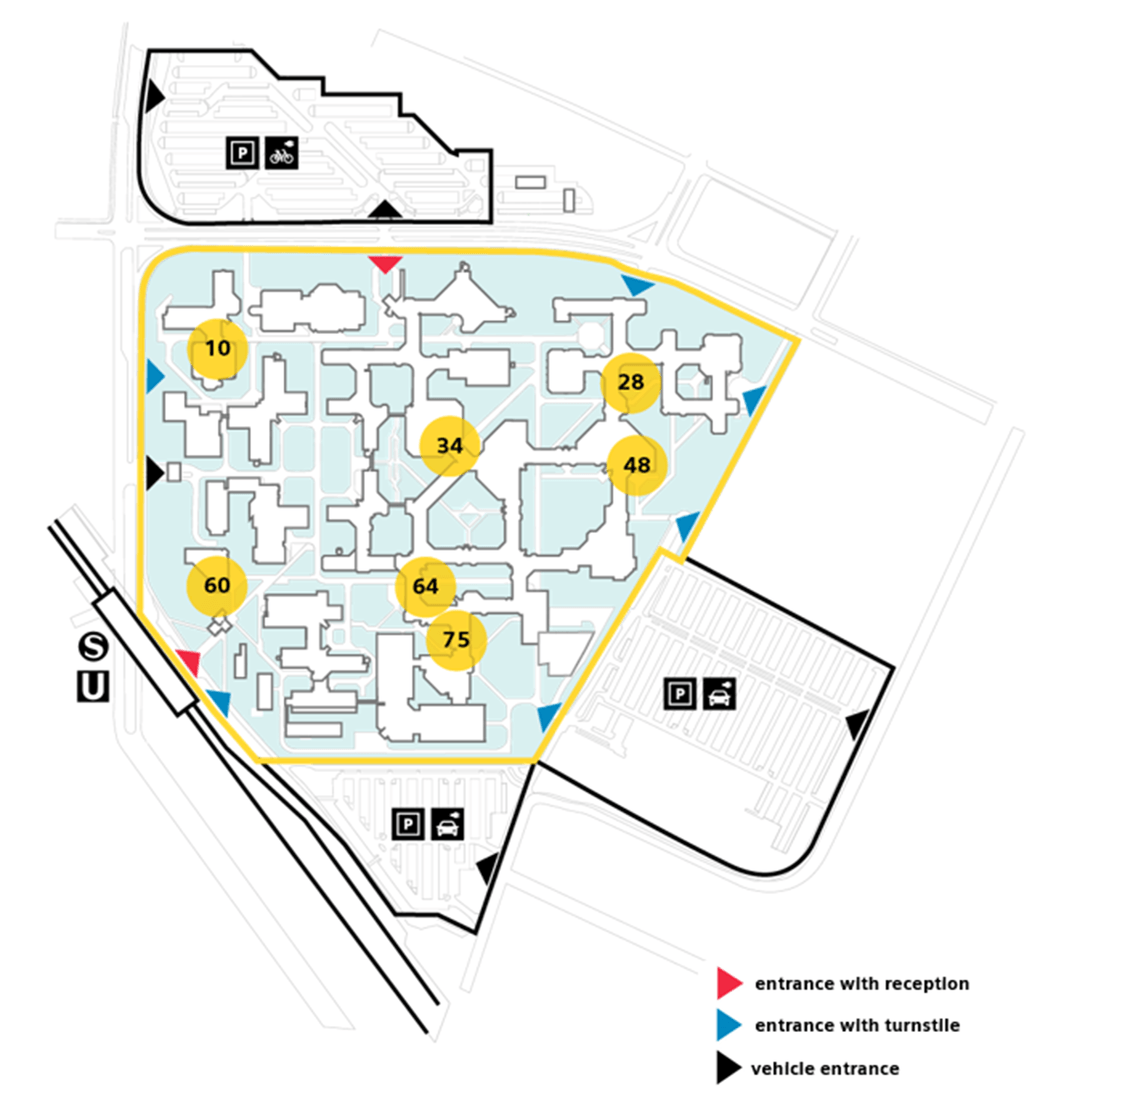 Site plan with leasable building areas